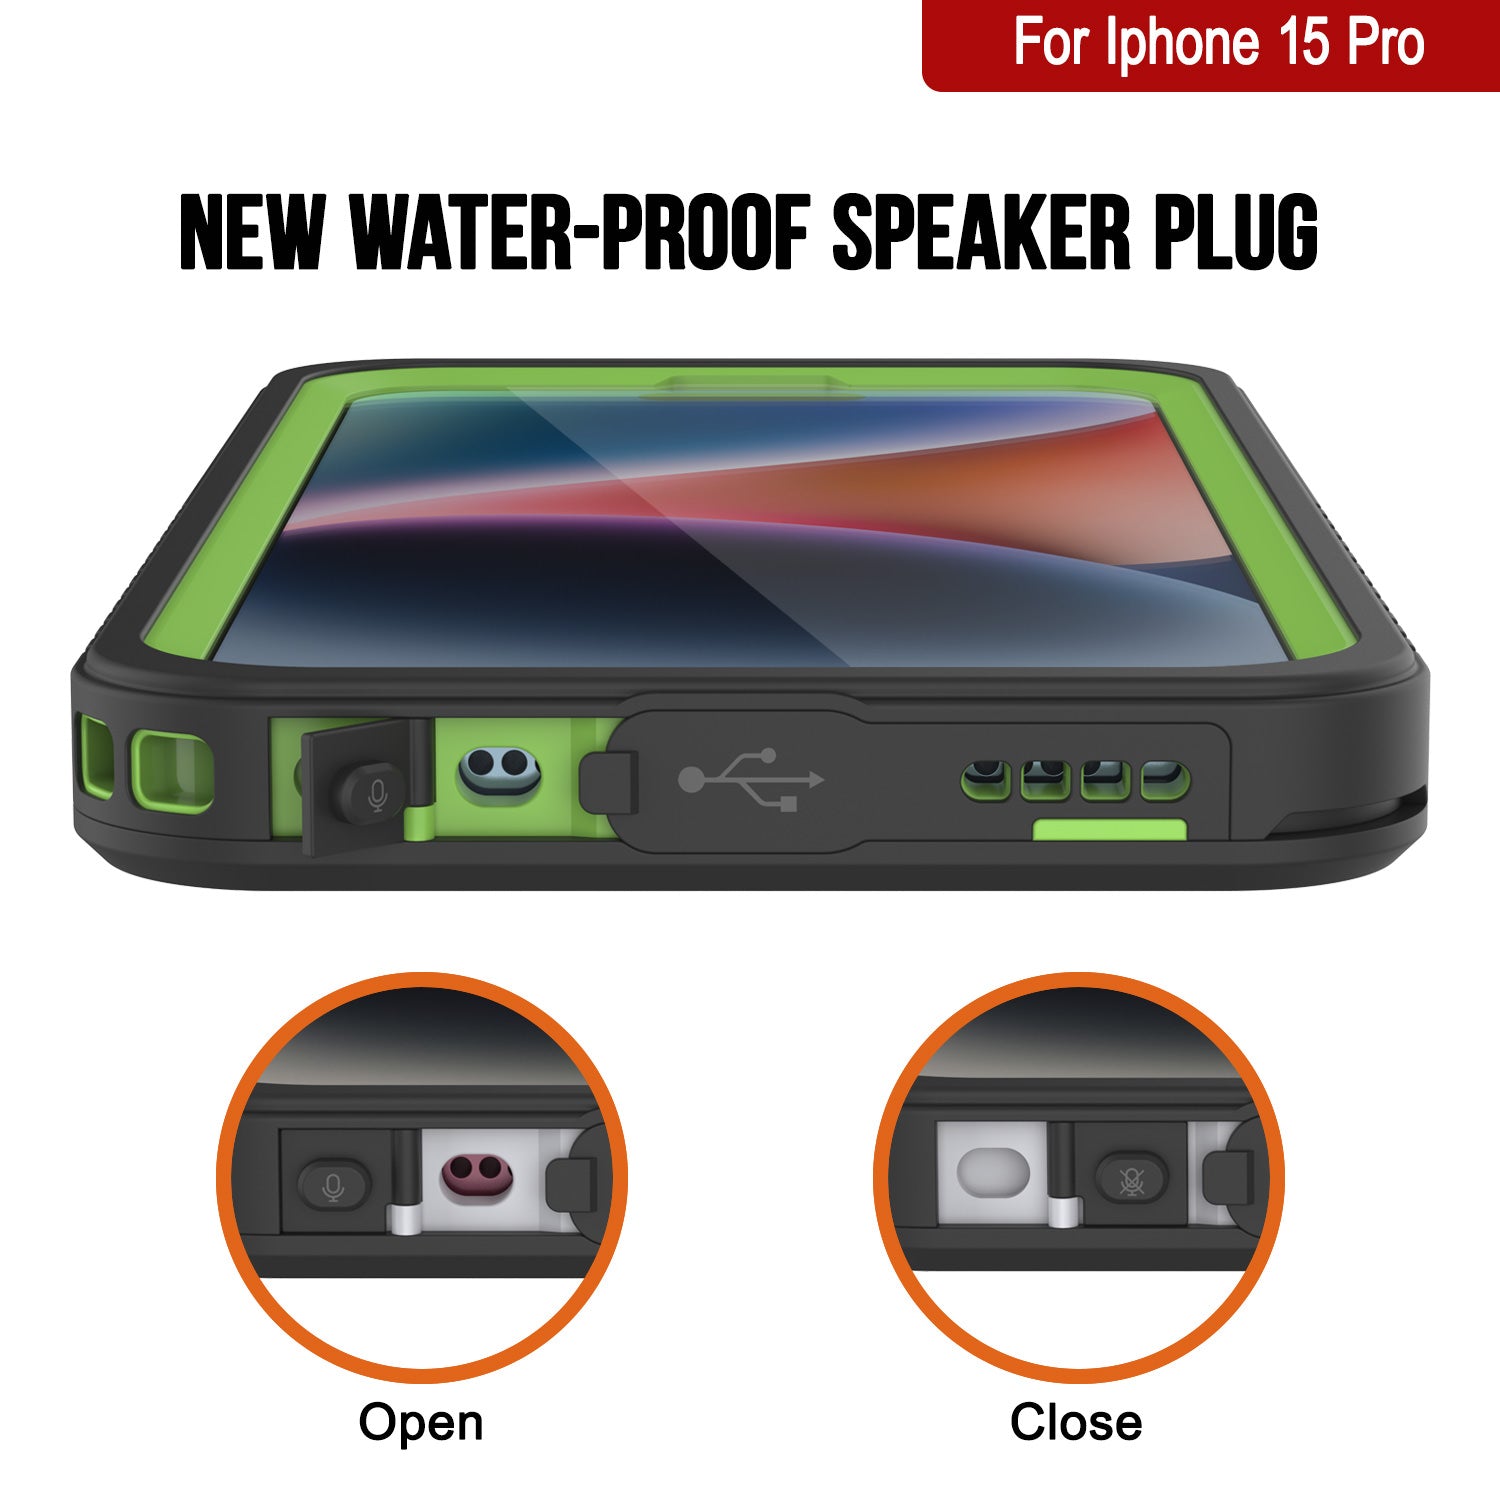 iPhone 15 Pro Waterproof Case, Punkcase [Extreme Series] Armor Cover W/ Built In Screen Protector [Light Green]